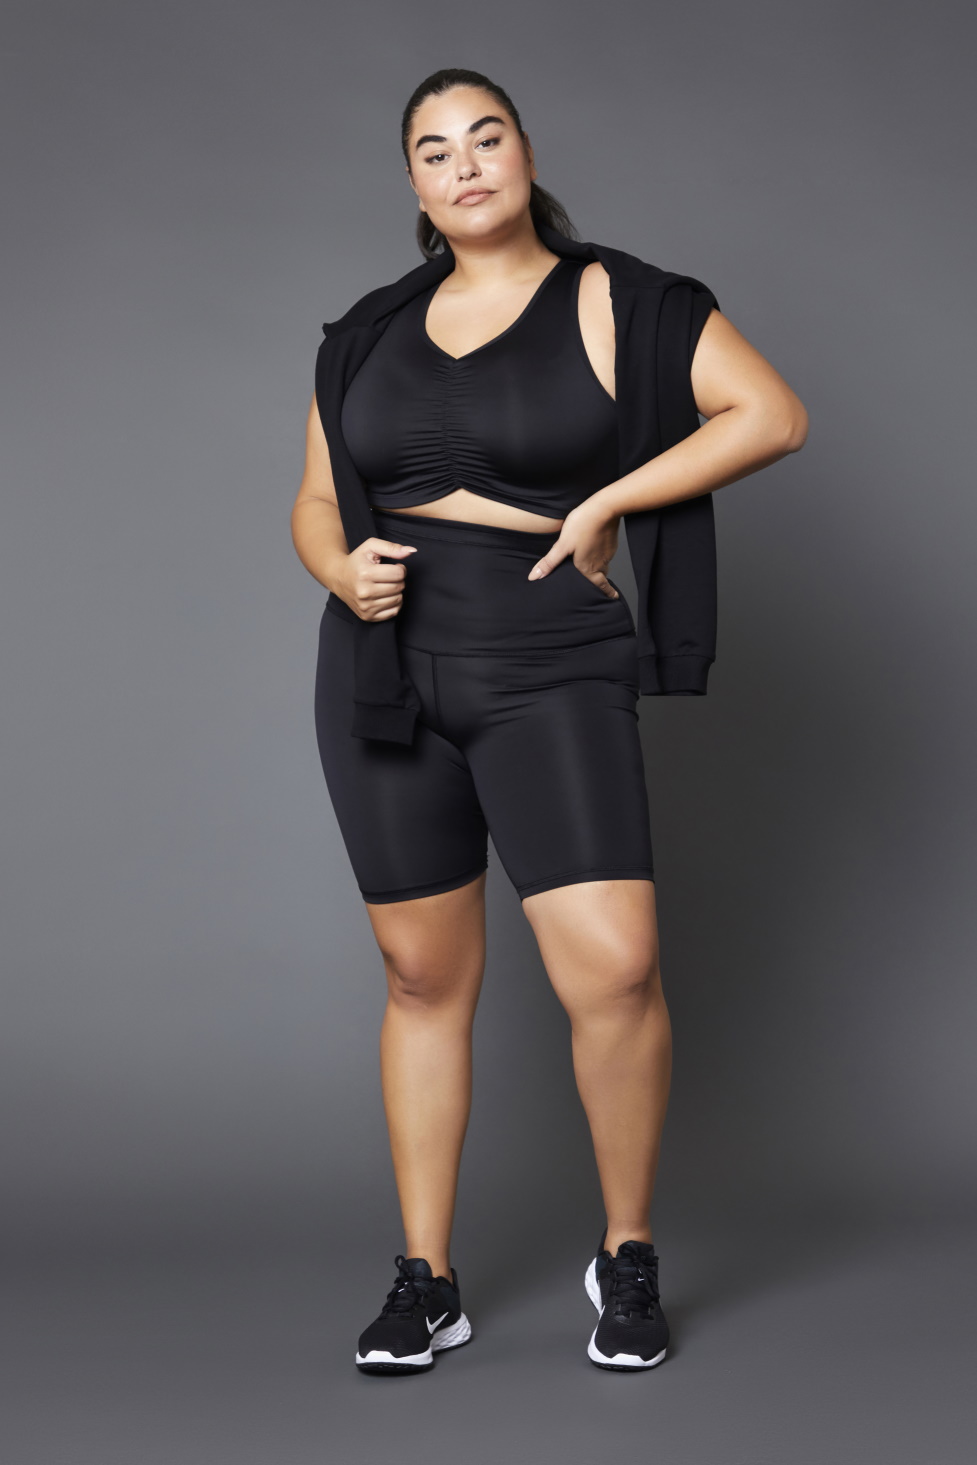 Mighty Lady - High Waist Plus Size Short